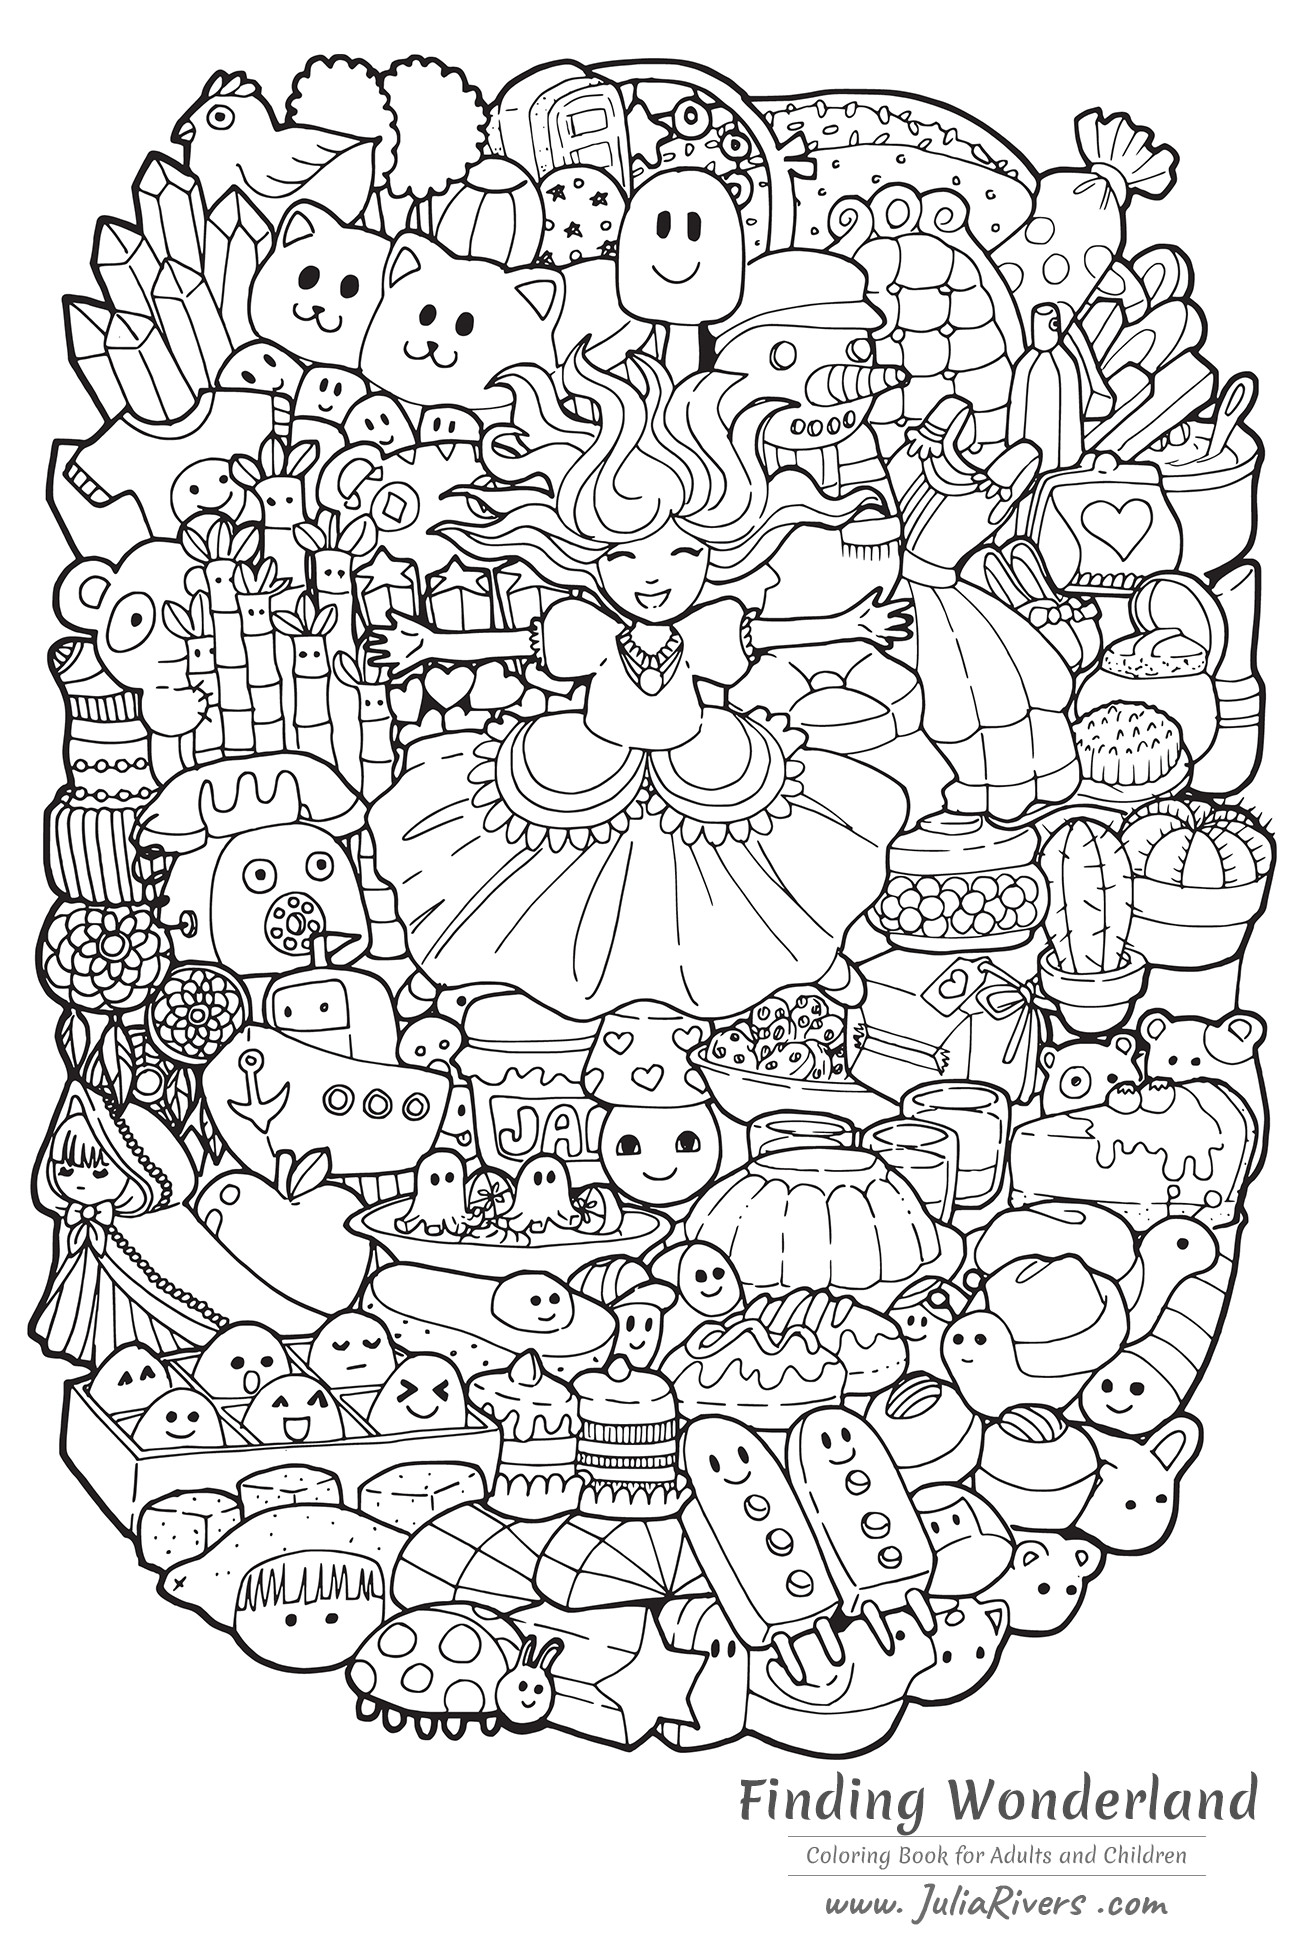 46  Anime Mandala Coloring Pages  Best Free